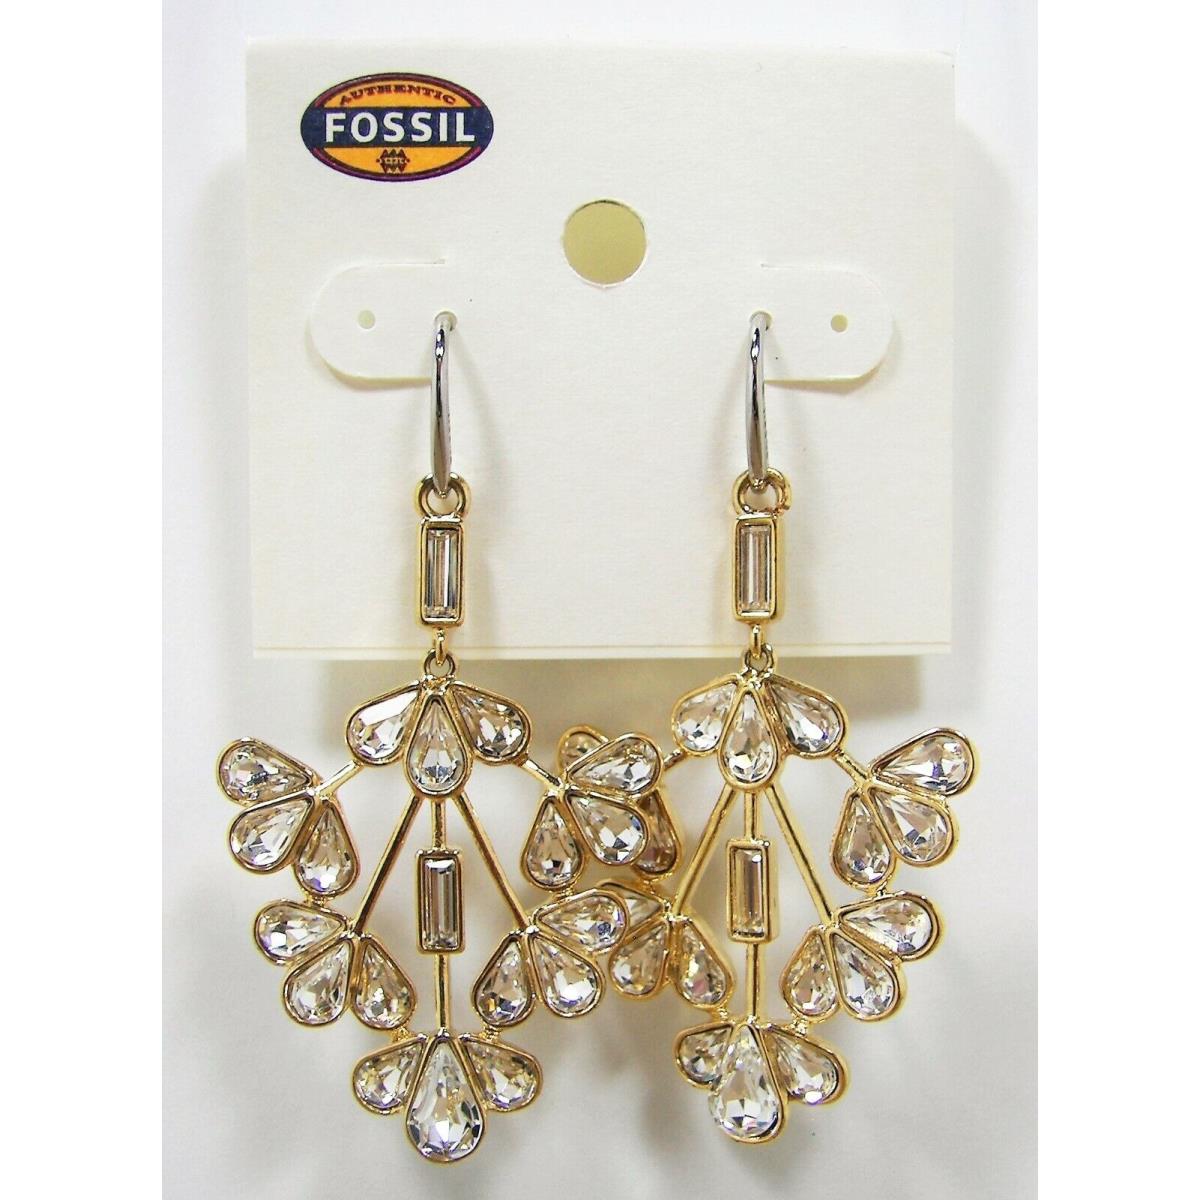 Fossil Mesh Glitz Drop Earrings Crystal Floral Design Gold Tone Metal Glamour